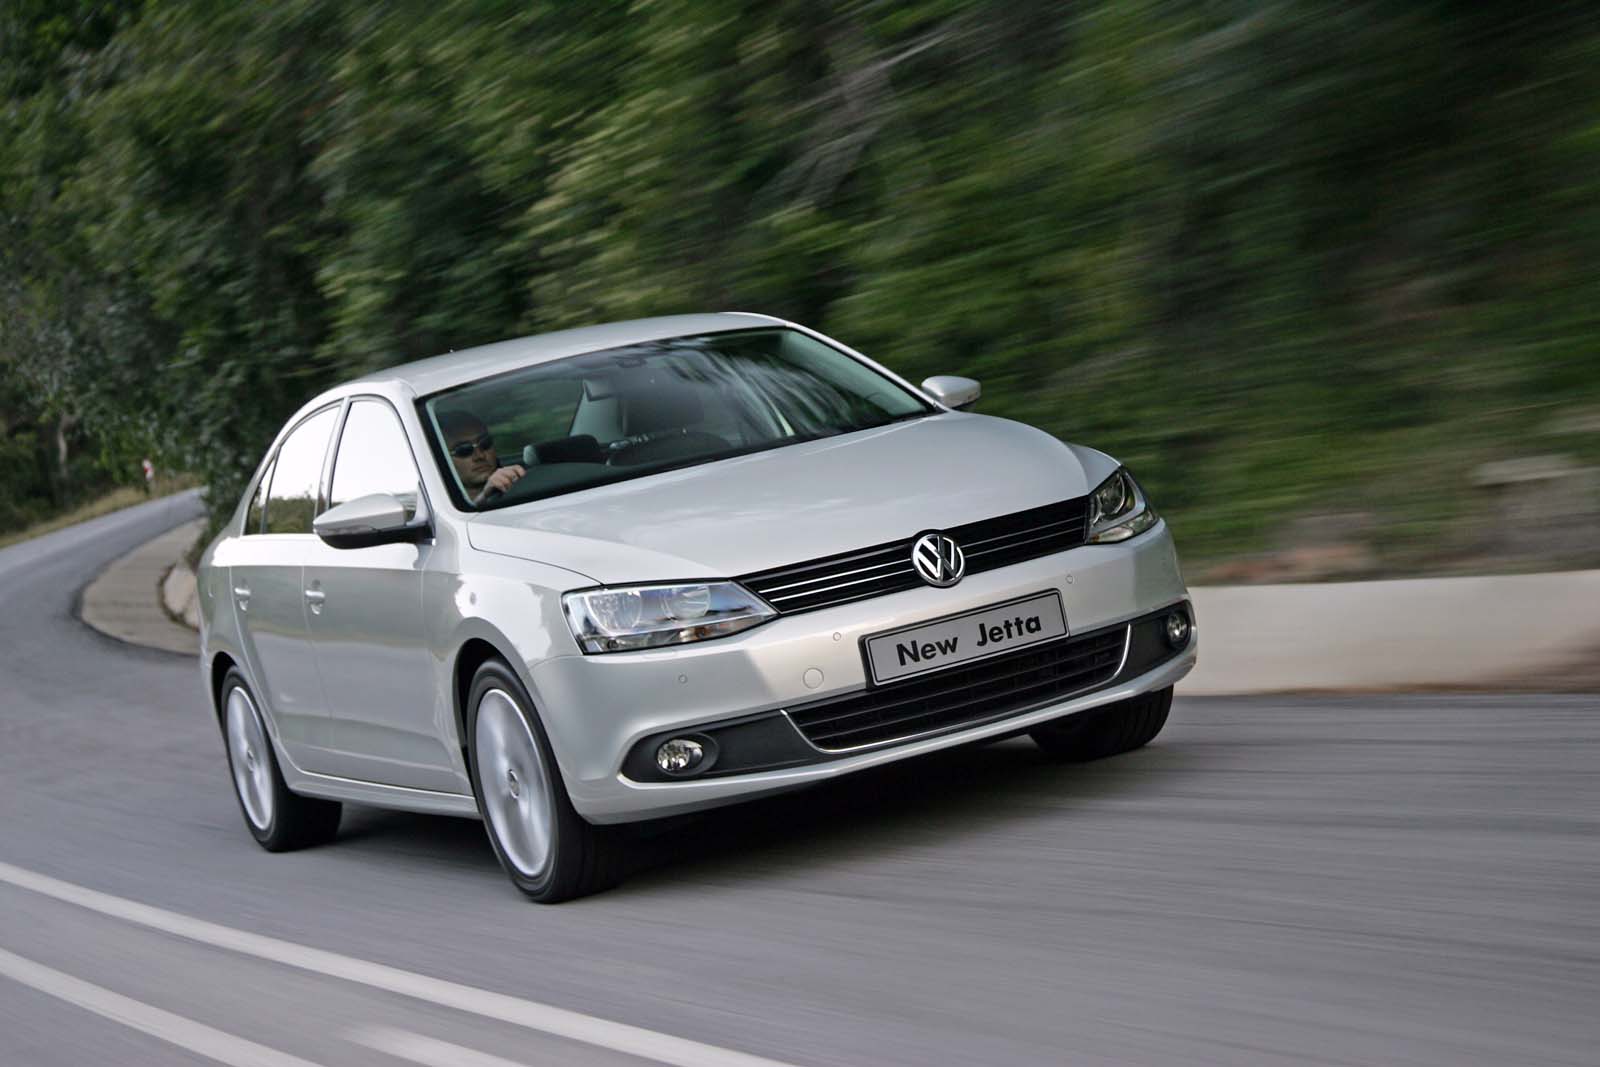 VW Jetta 1.4 TSI from conservative to desirable